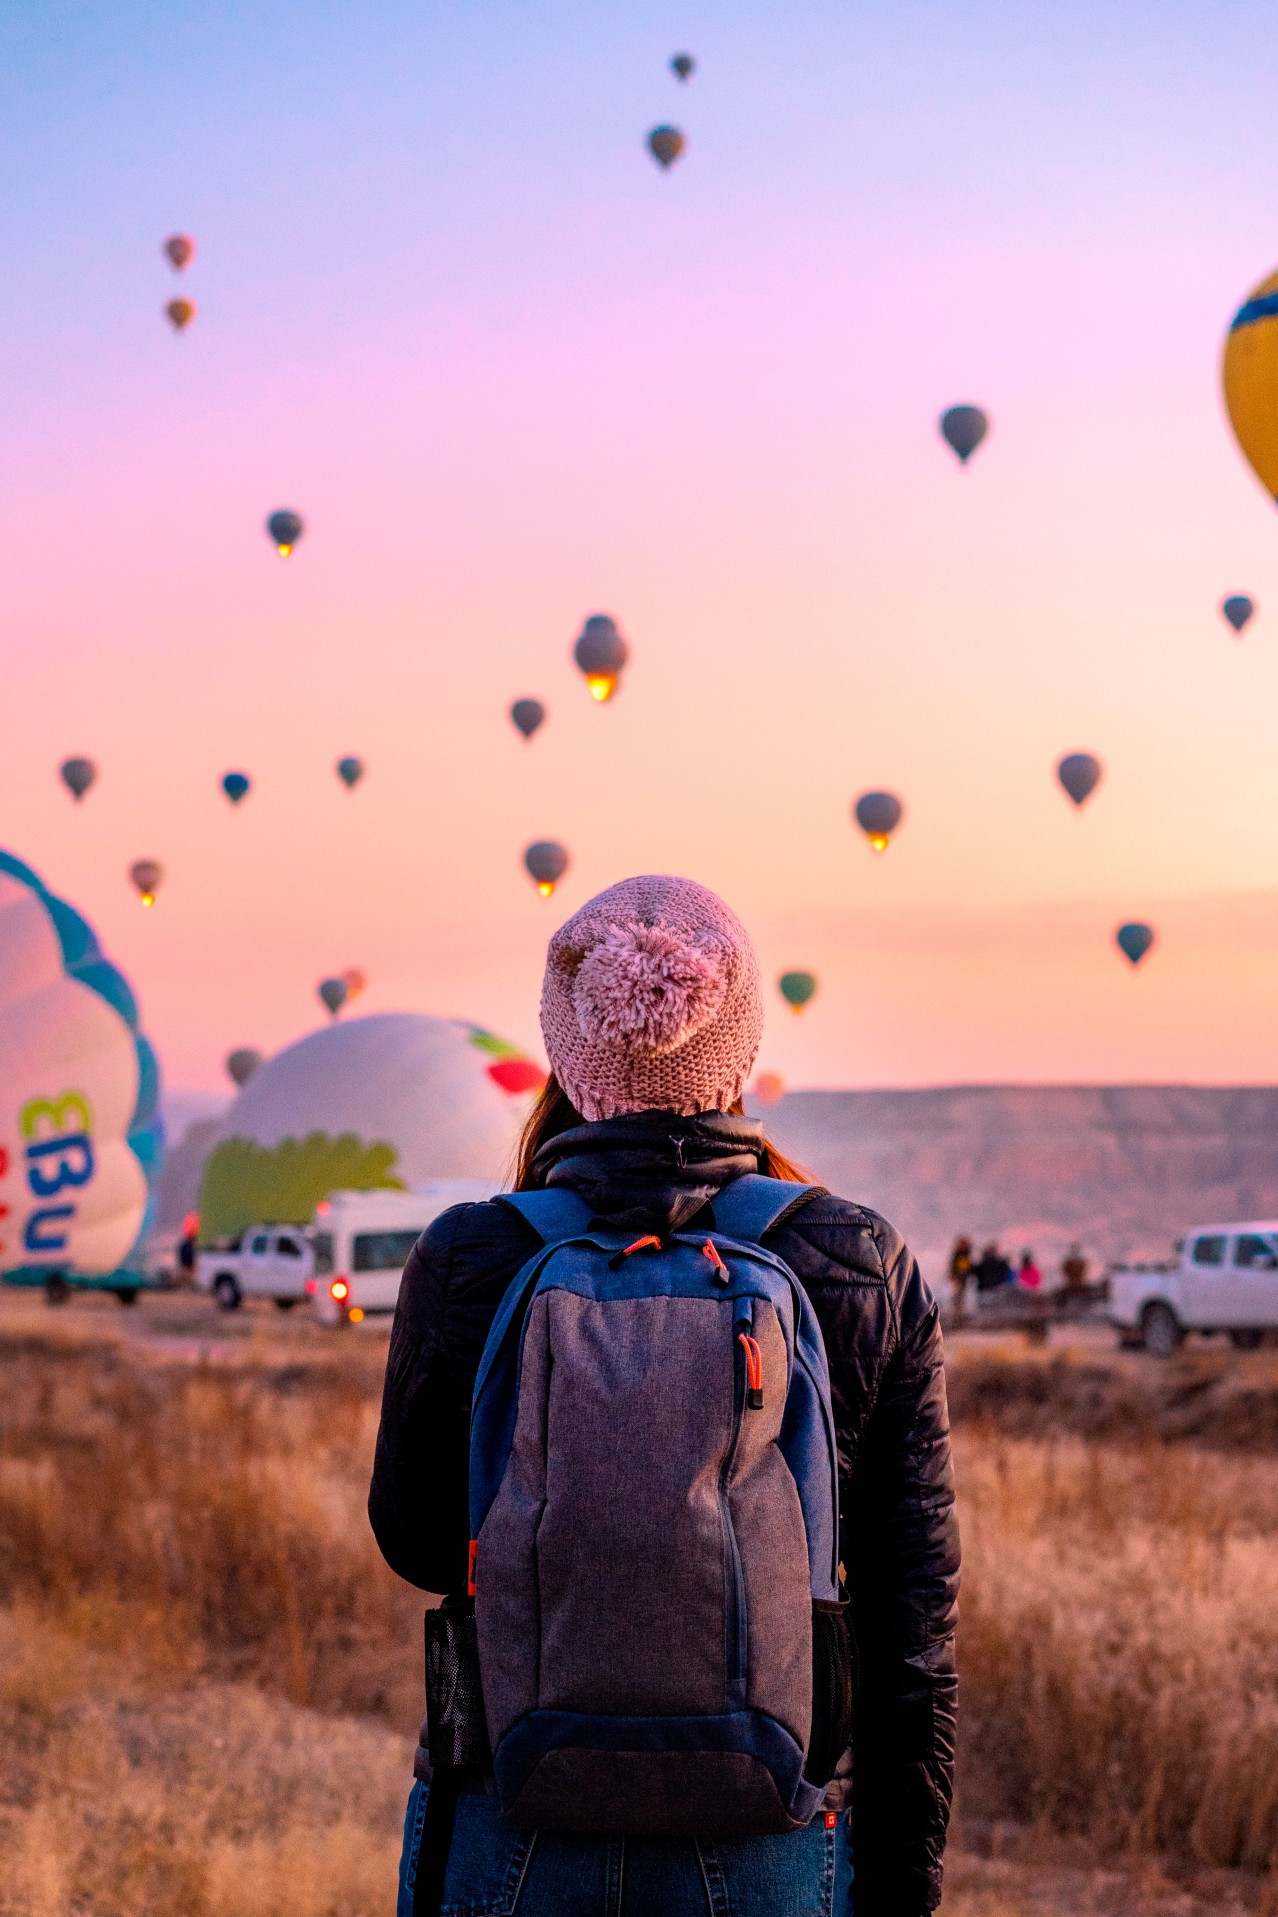 A Young Girl Looks at Balloons in Cappadocia